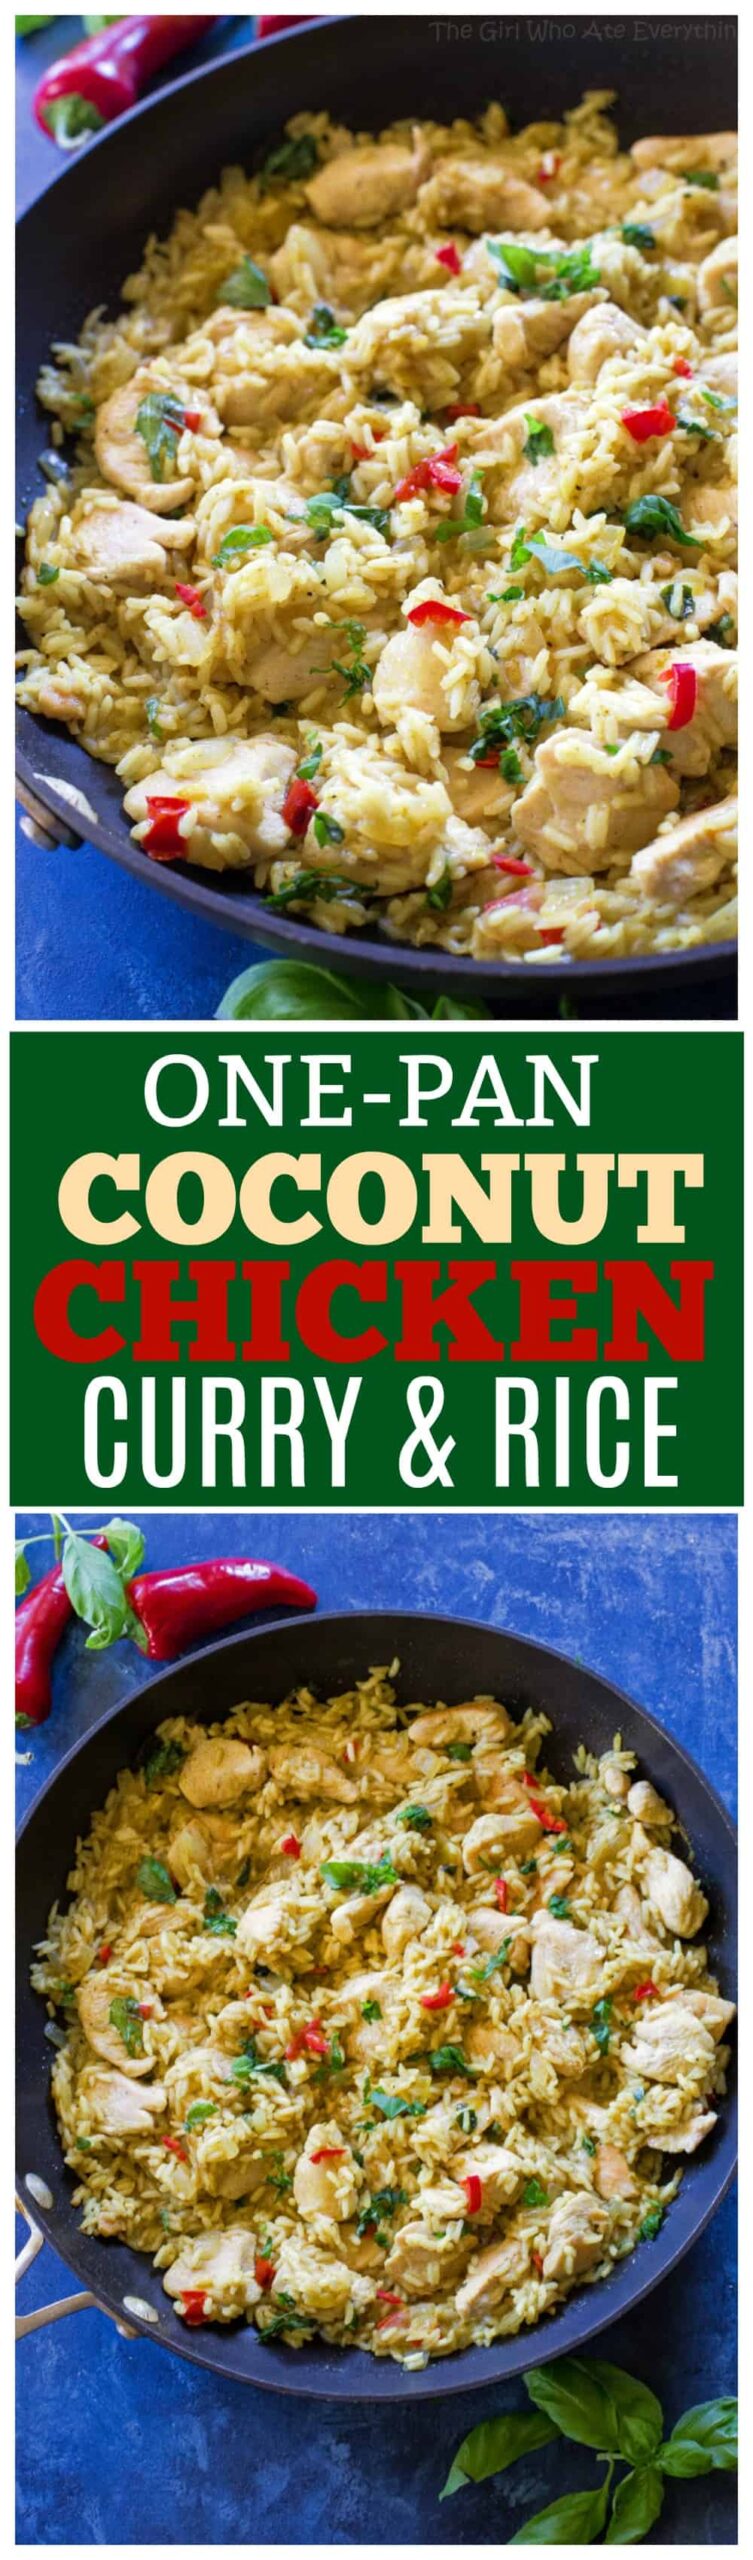 One-Pan Coconut Chicken Curry and Rice